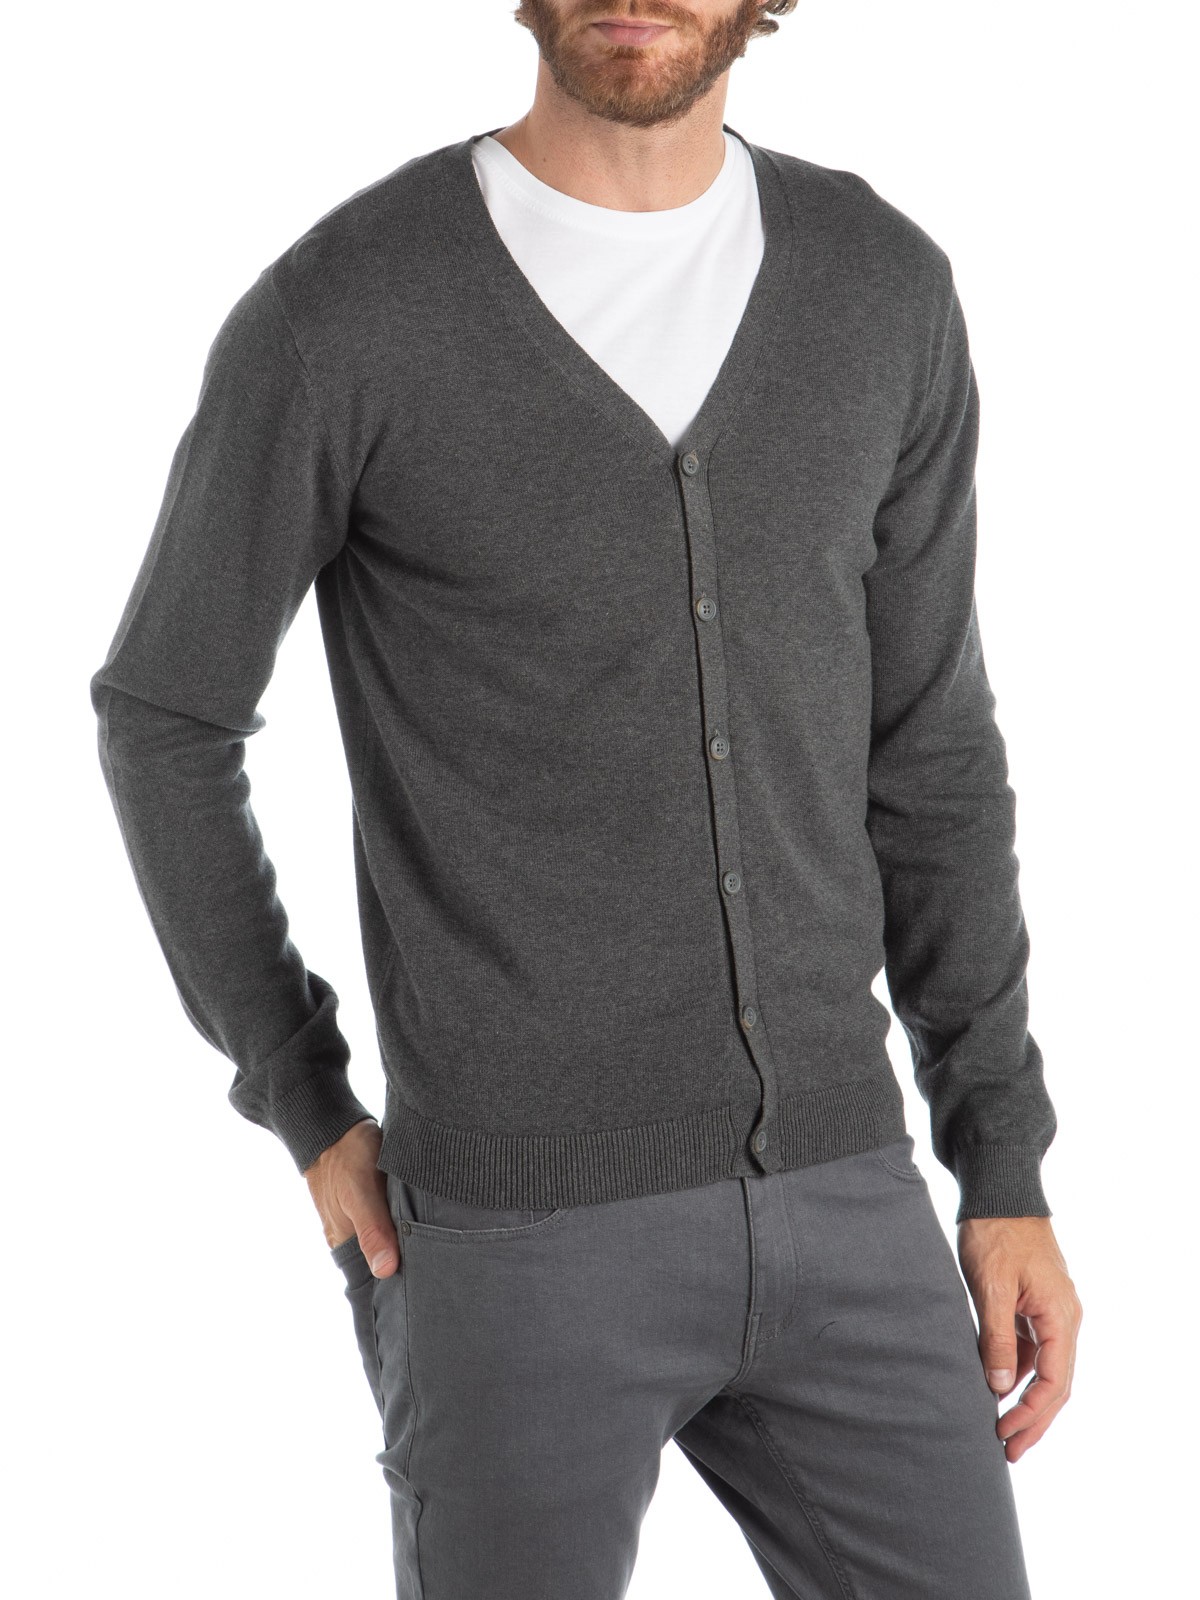 gilet gris anthracite homme